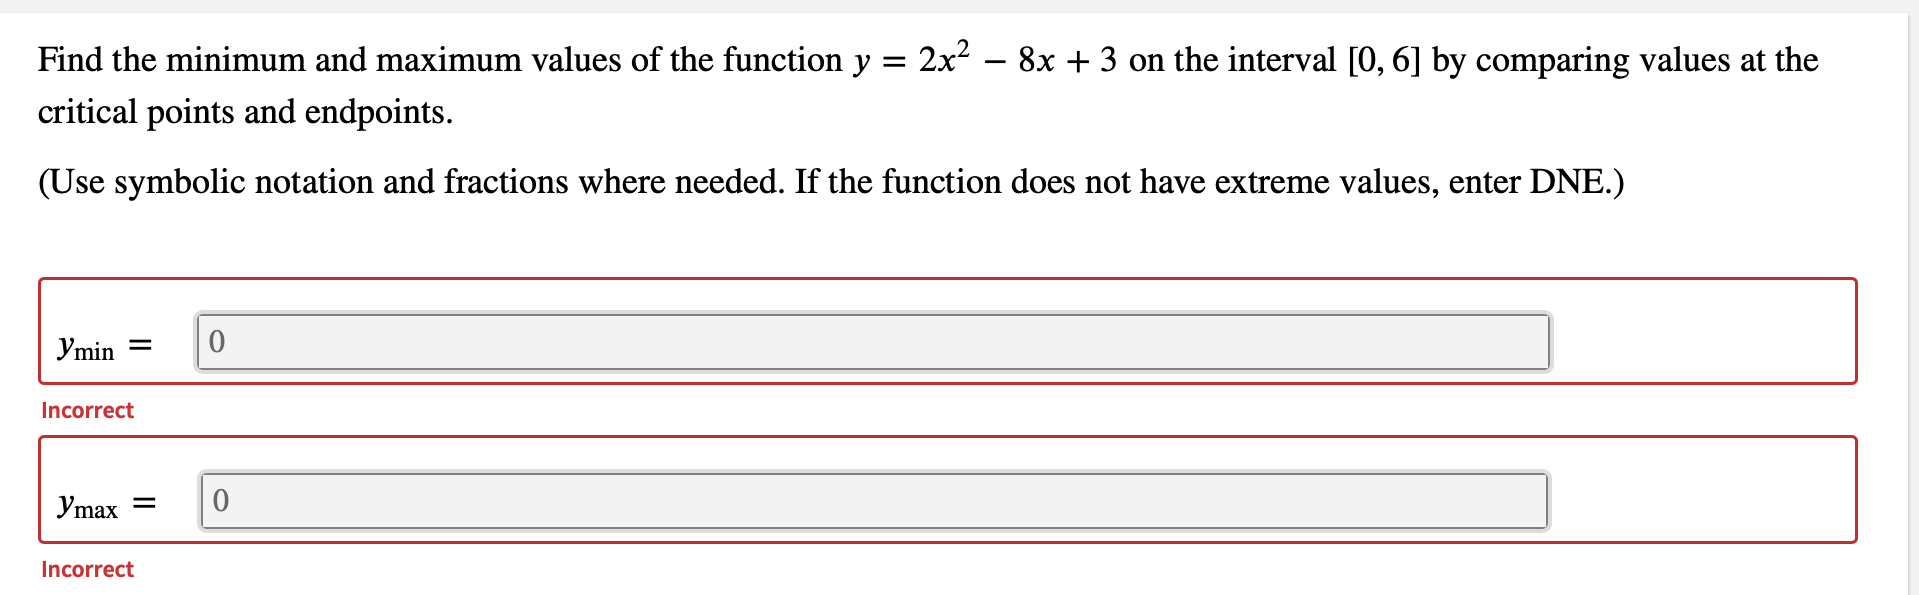 Find the minimum and maximum values of the function y = 2x² – 8x + 3 on the interval [0, 6] by comparing values at the
critical points and endpoints.
(Use symbolic notation and fractions where needed. If the function does not have extreme values, enter DNE.)
